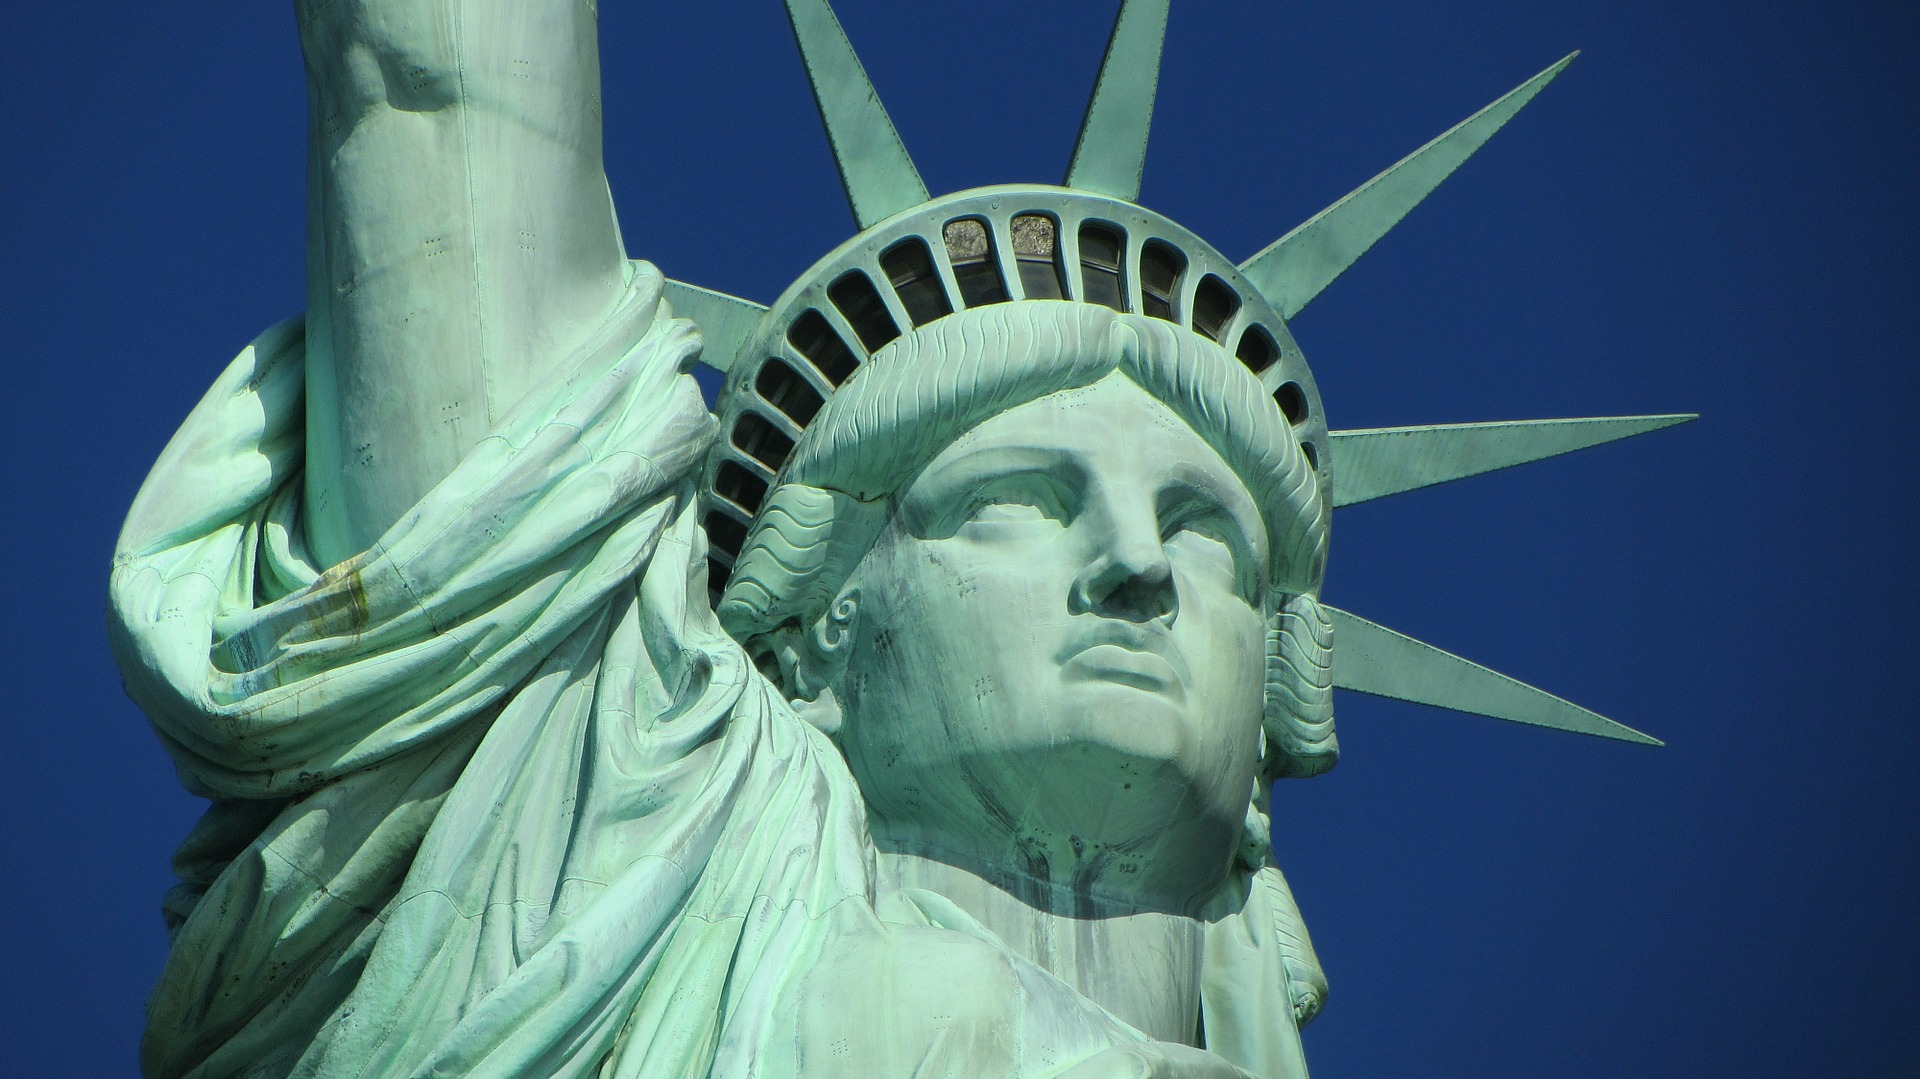 a close up of a statue with Statue of Liberty in the background